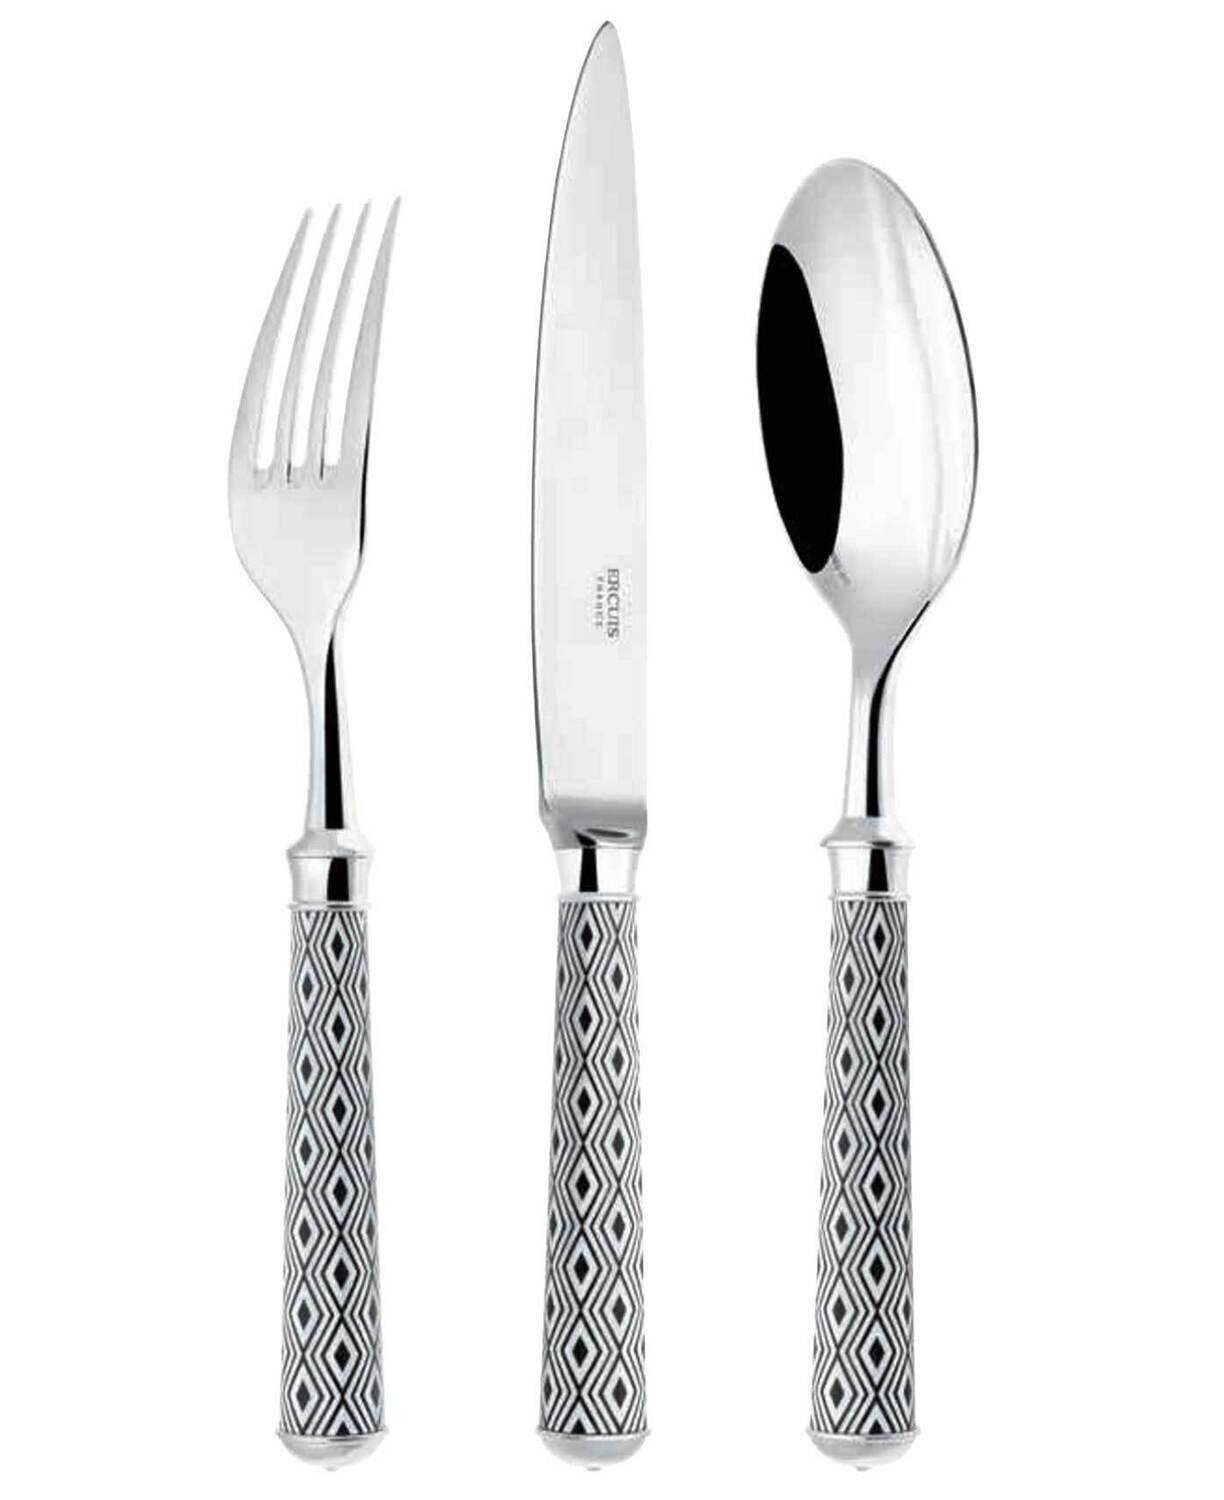 Ercuis Arlequin Black Serving Fork 10.125 Inch Silver Plated F600541-42